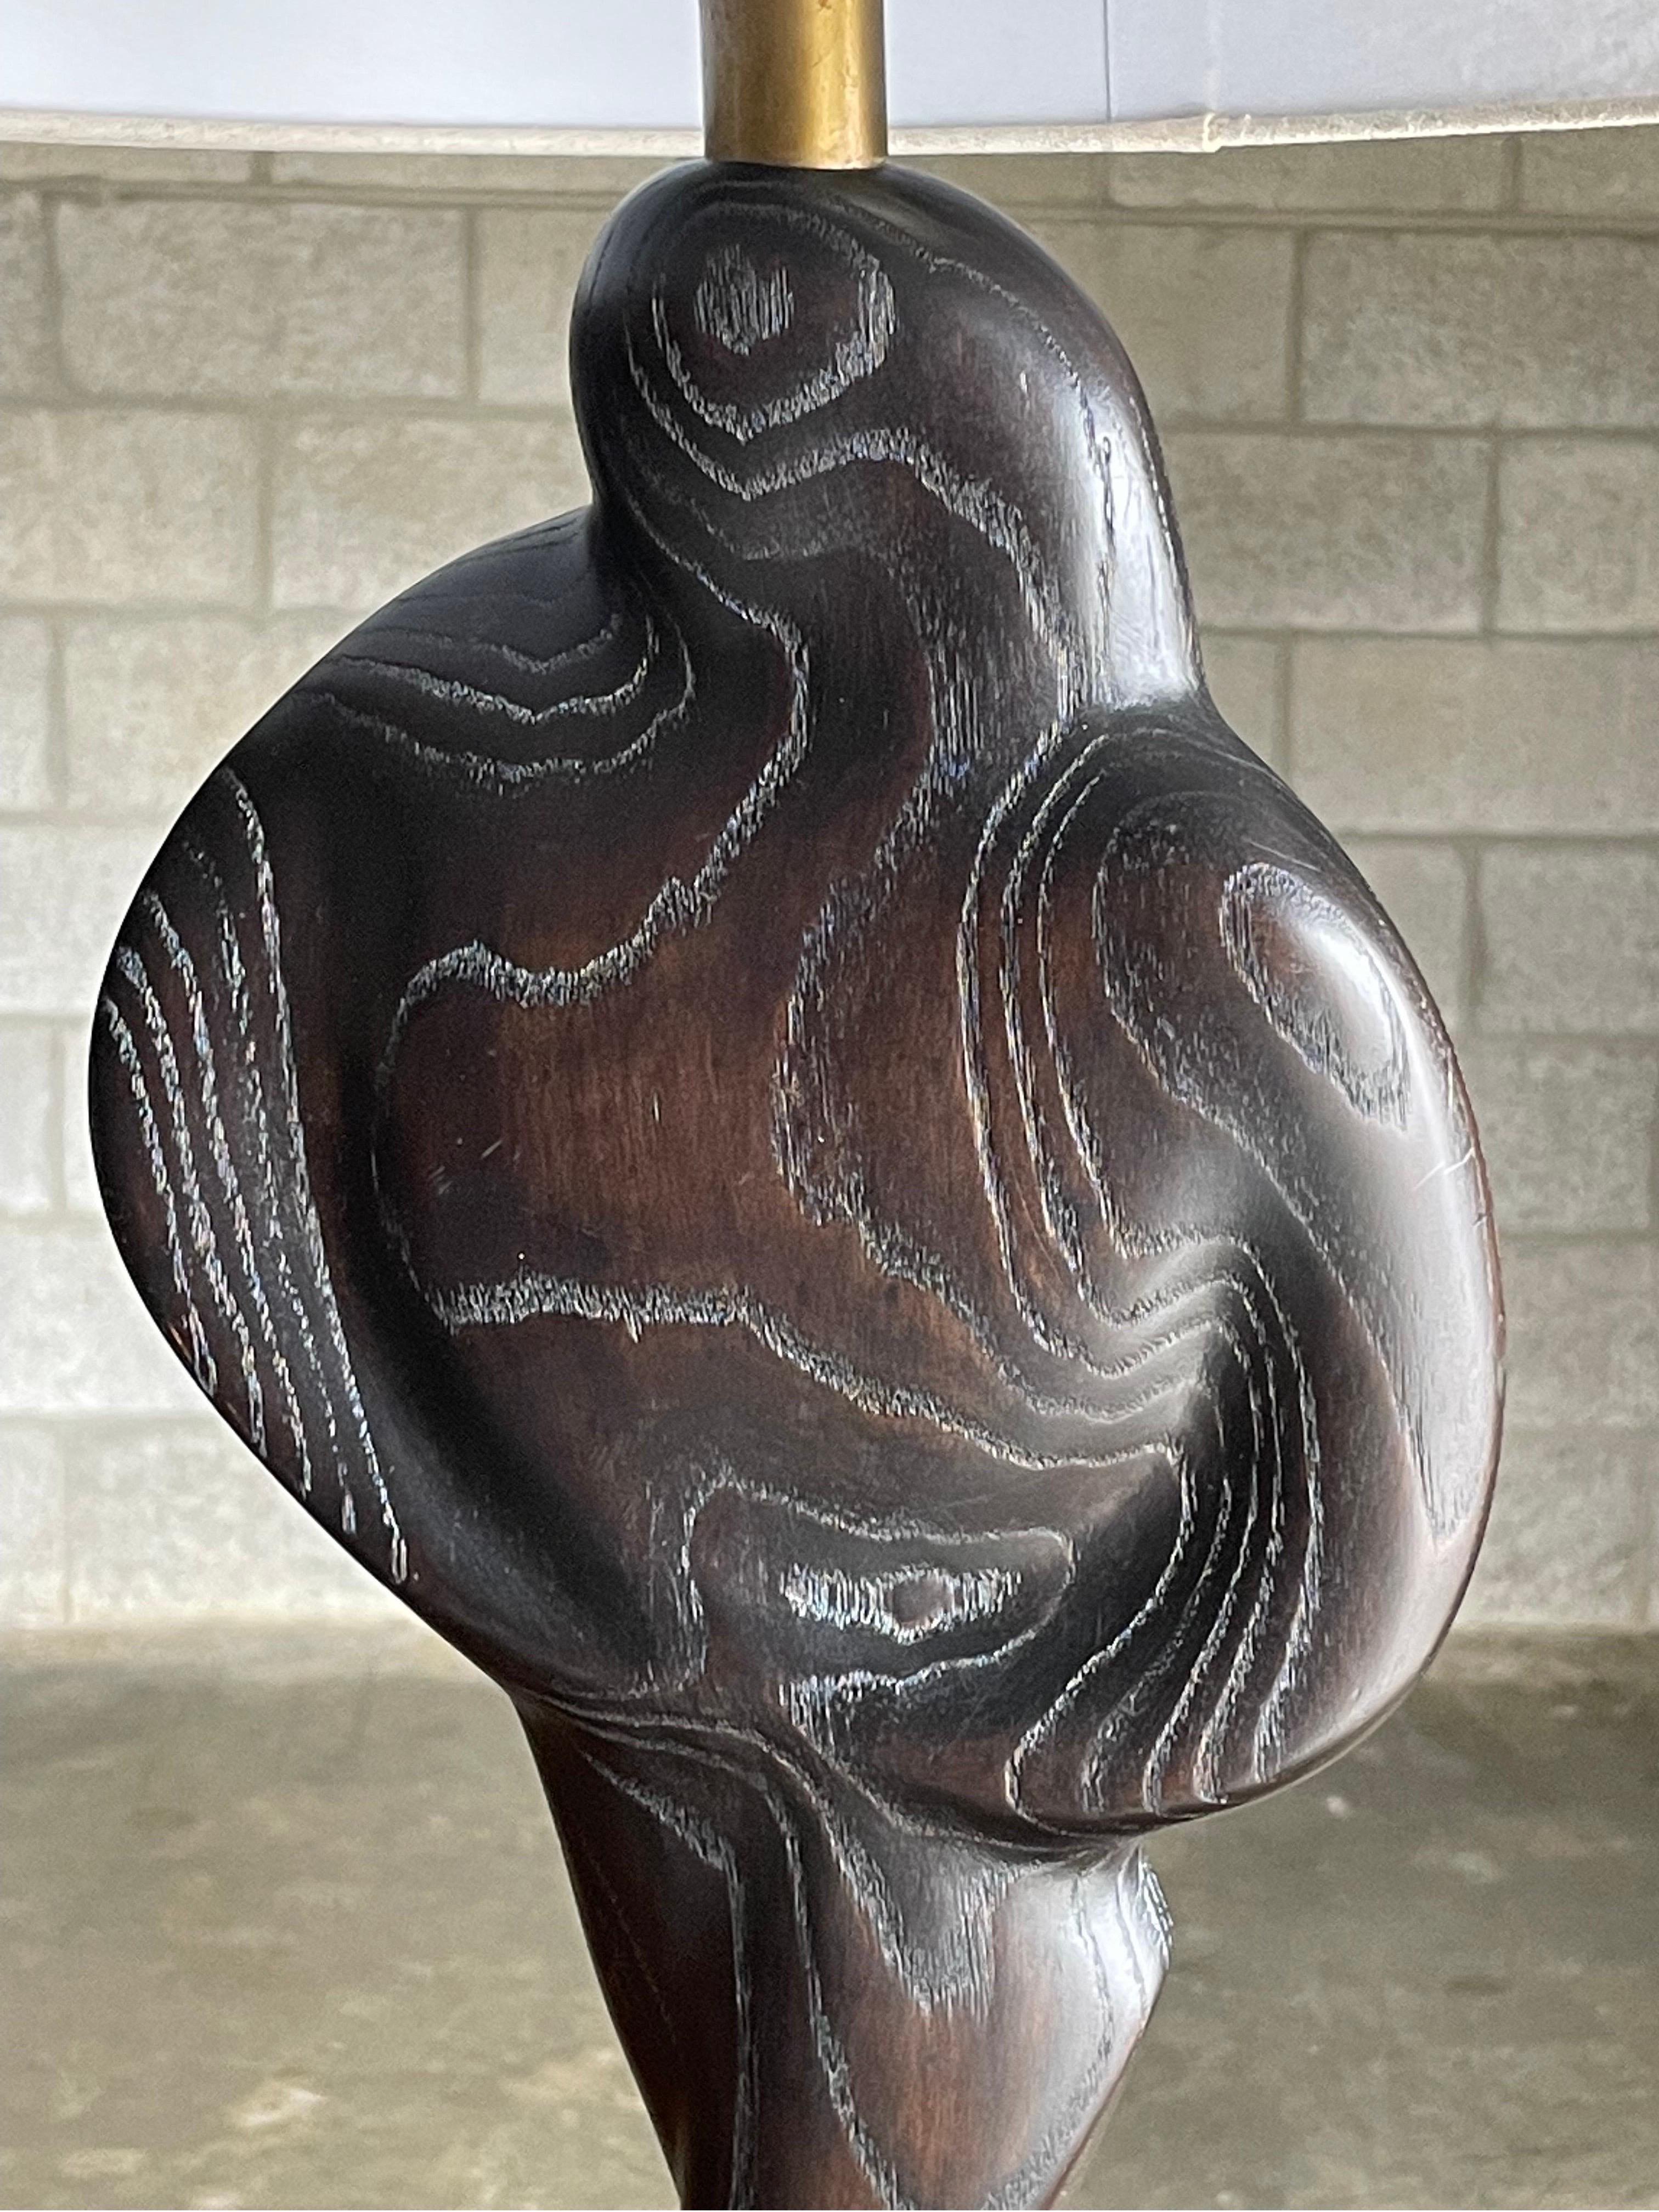 Sculptural figure table lamp in a black cerused finish attributed to Yasha Heifetz. Great scale and form with organic movement.

Measures: Overall 
29” tall
15” wide

Body
7” wide 
1.5” deep

Base 
9” wide 
6” deep.